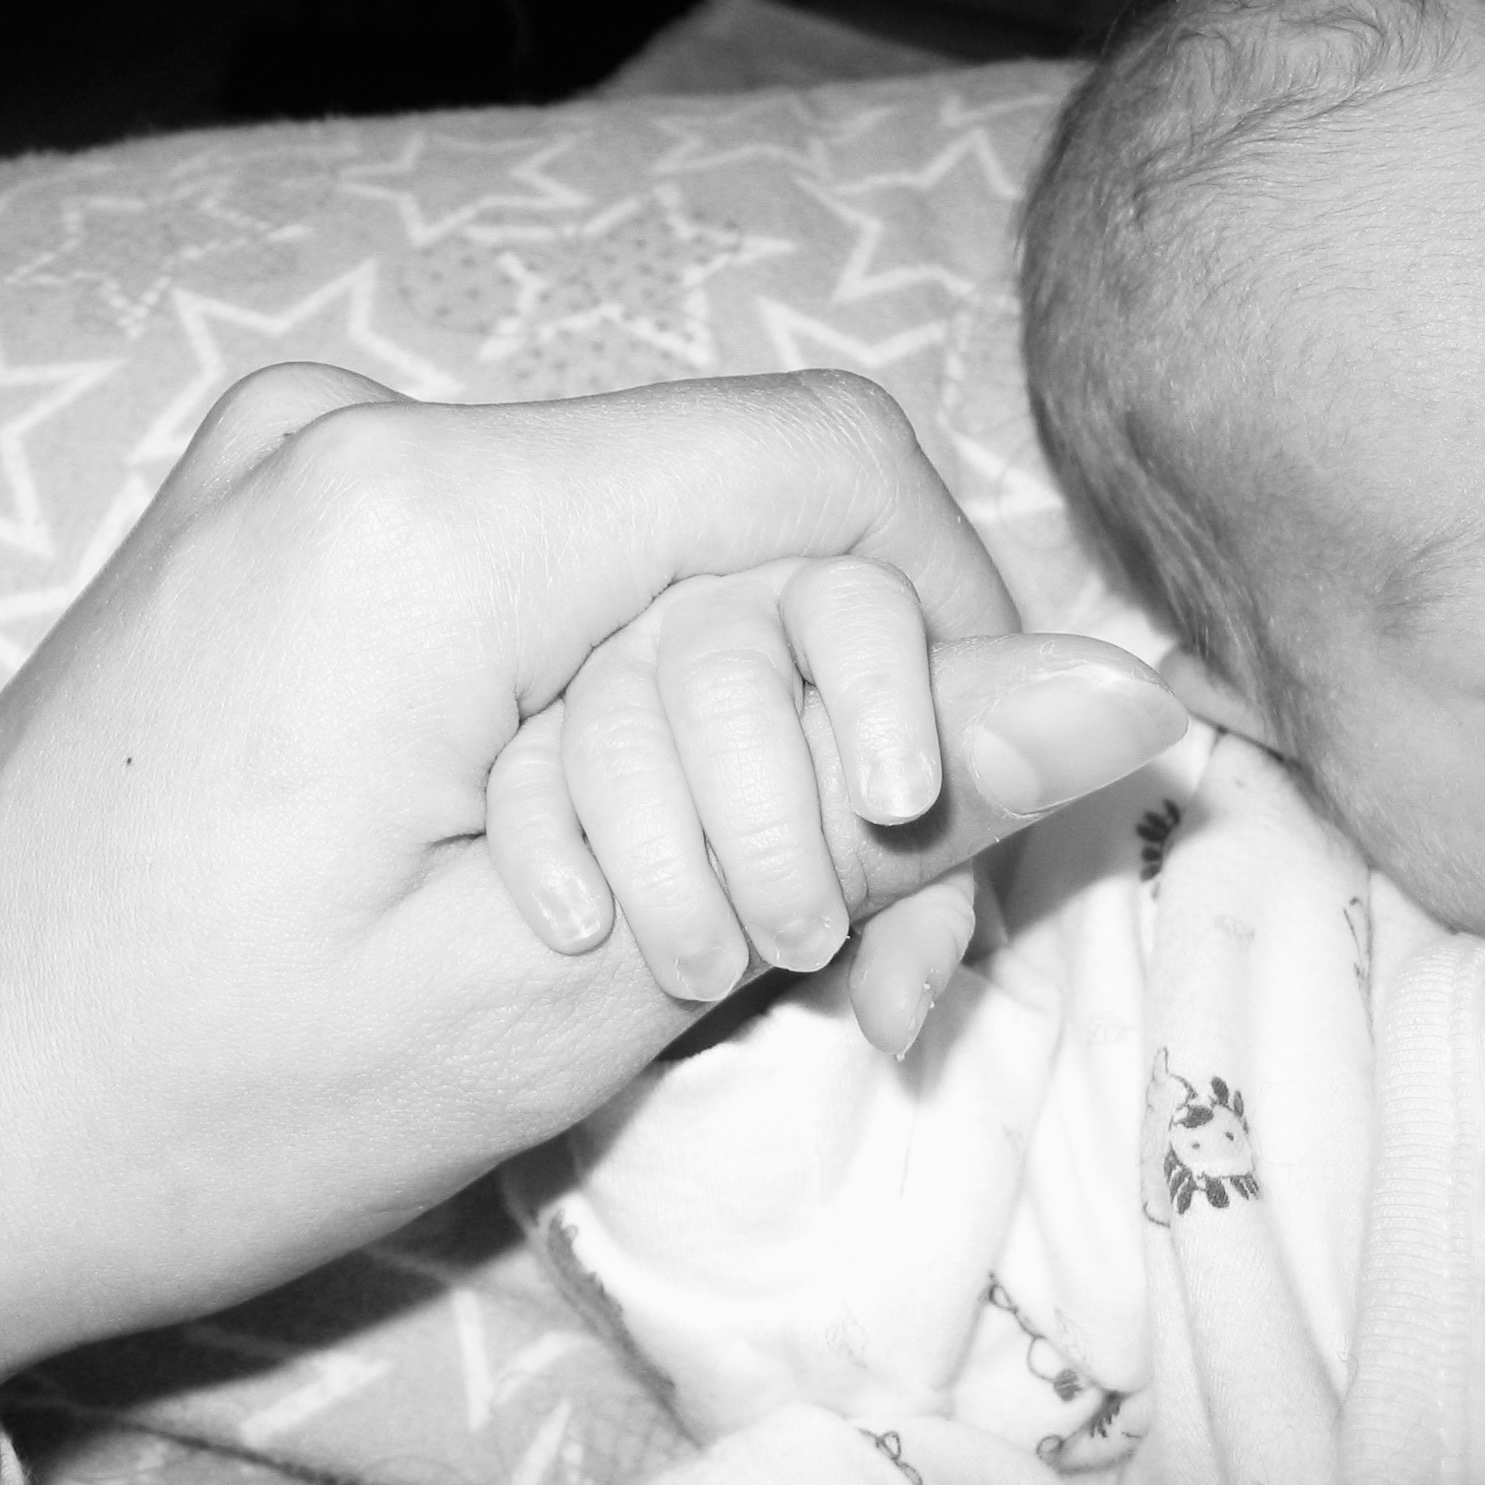 Baby’s hand gripping an adult’s thumb